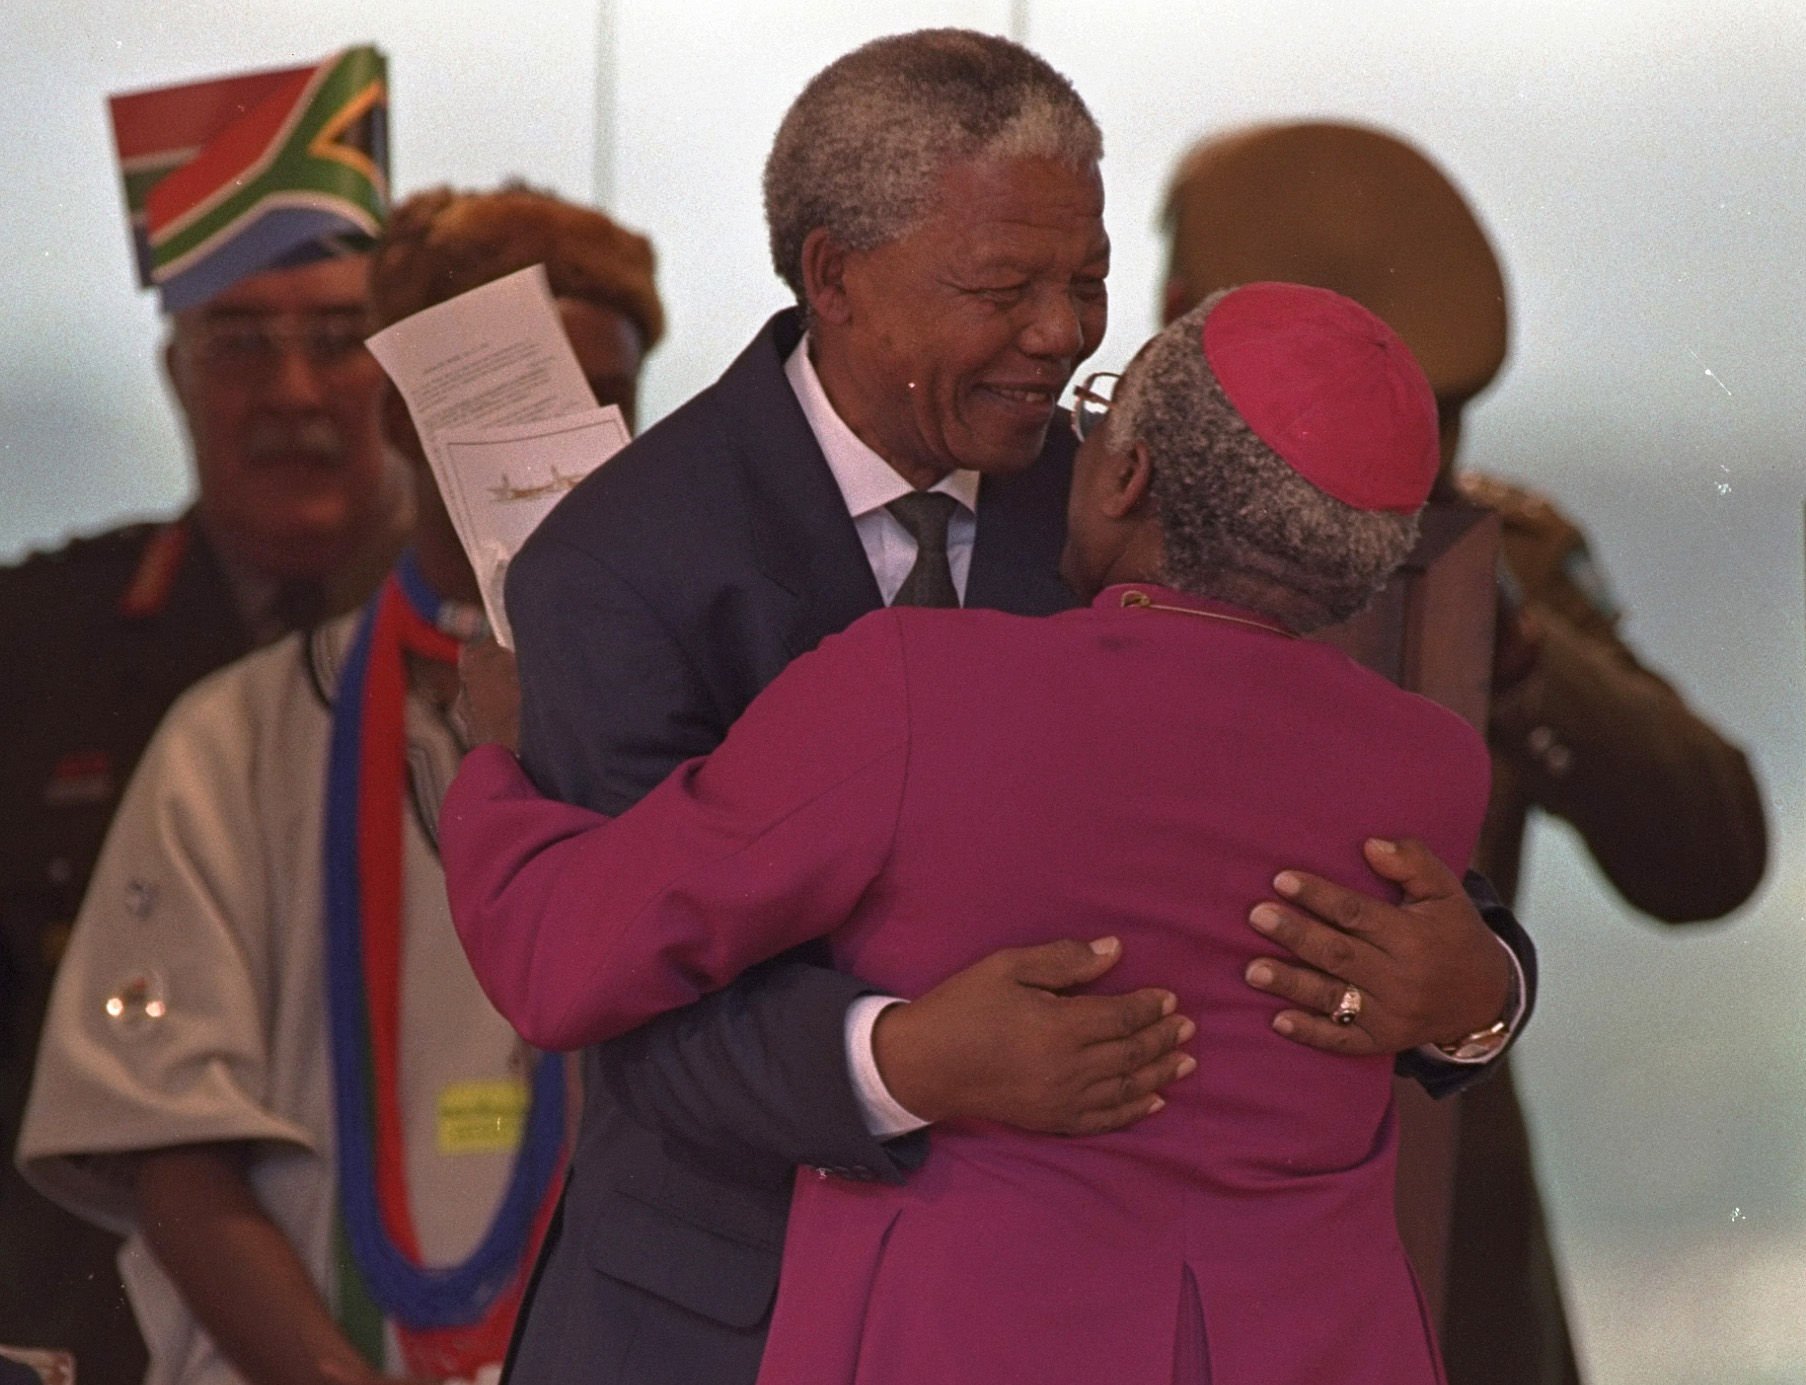 Former President Nelson Mandela gets a hug from Archbishop Desmond Tutu after Mandela was sworn in as president of South Africa at the Union Buildings in Pretoria on May 10 1994.